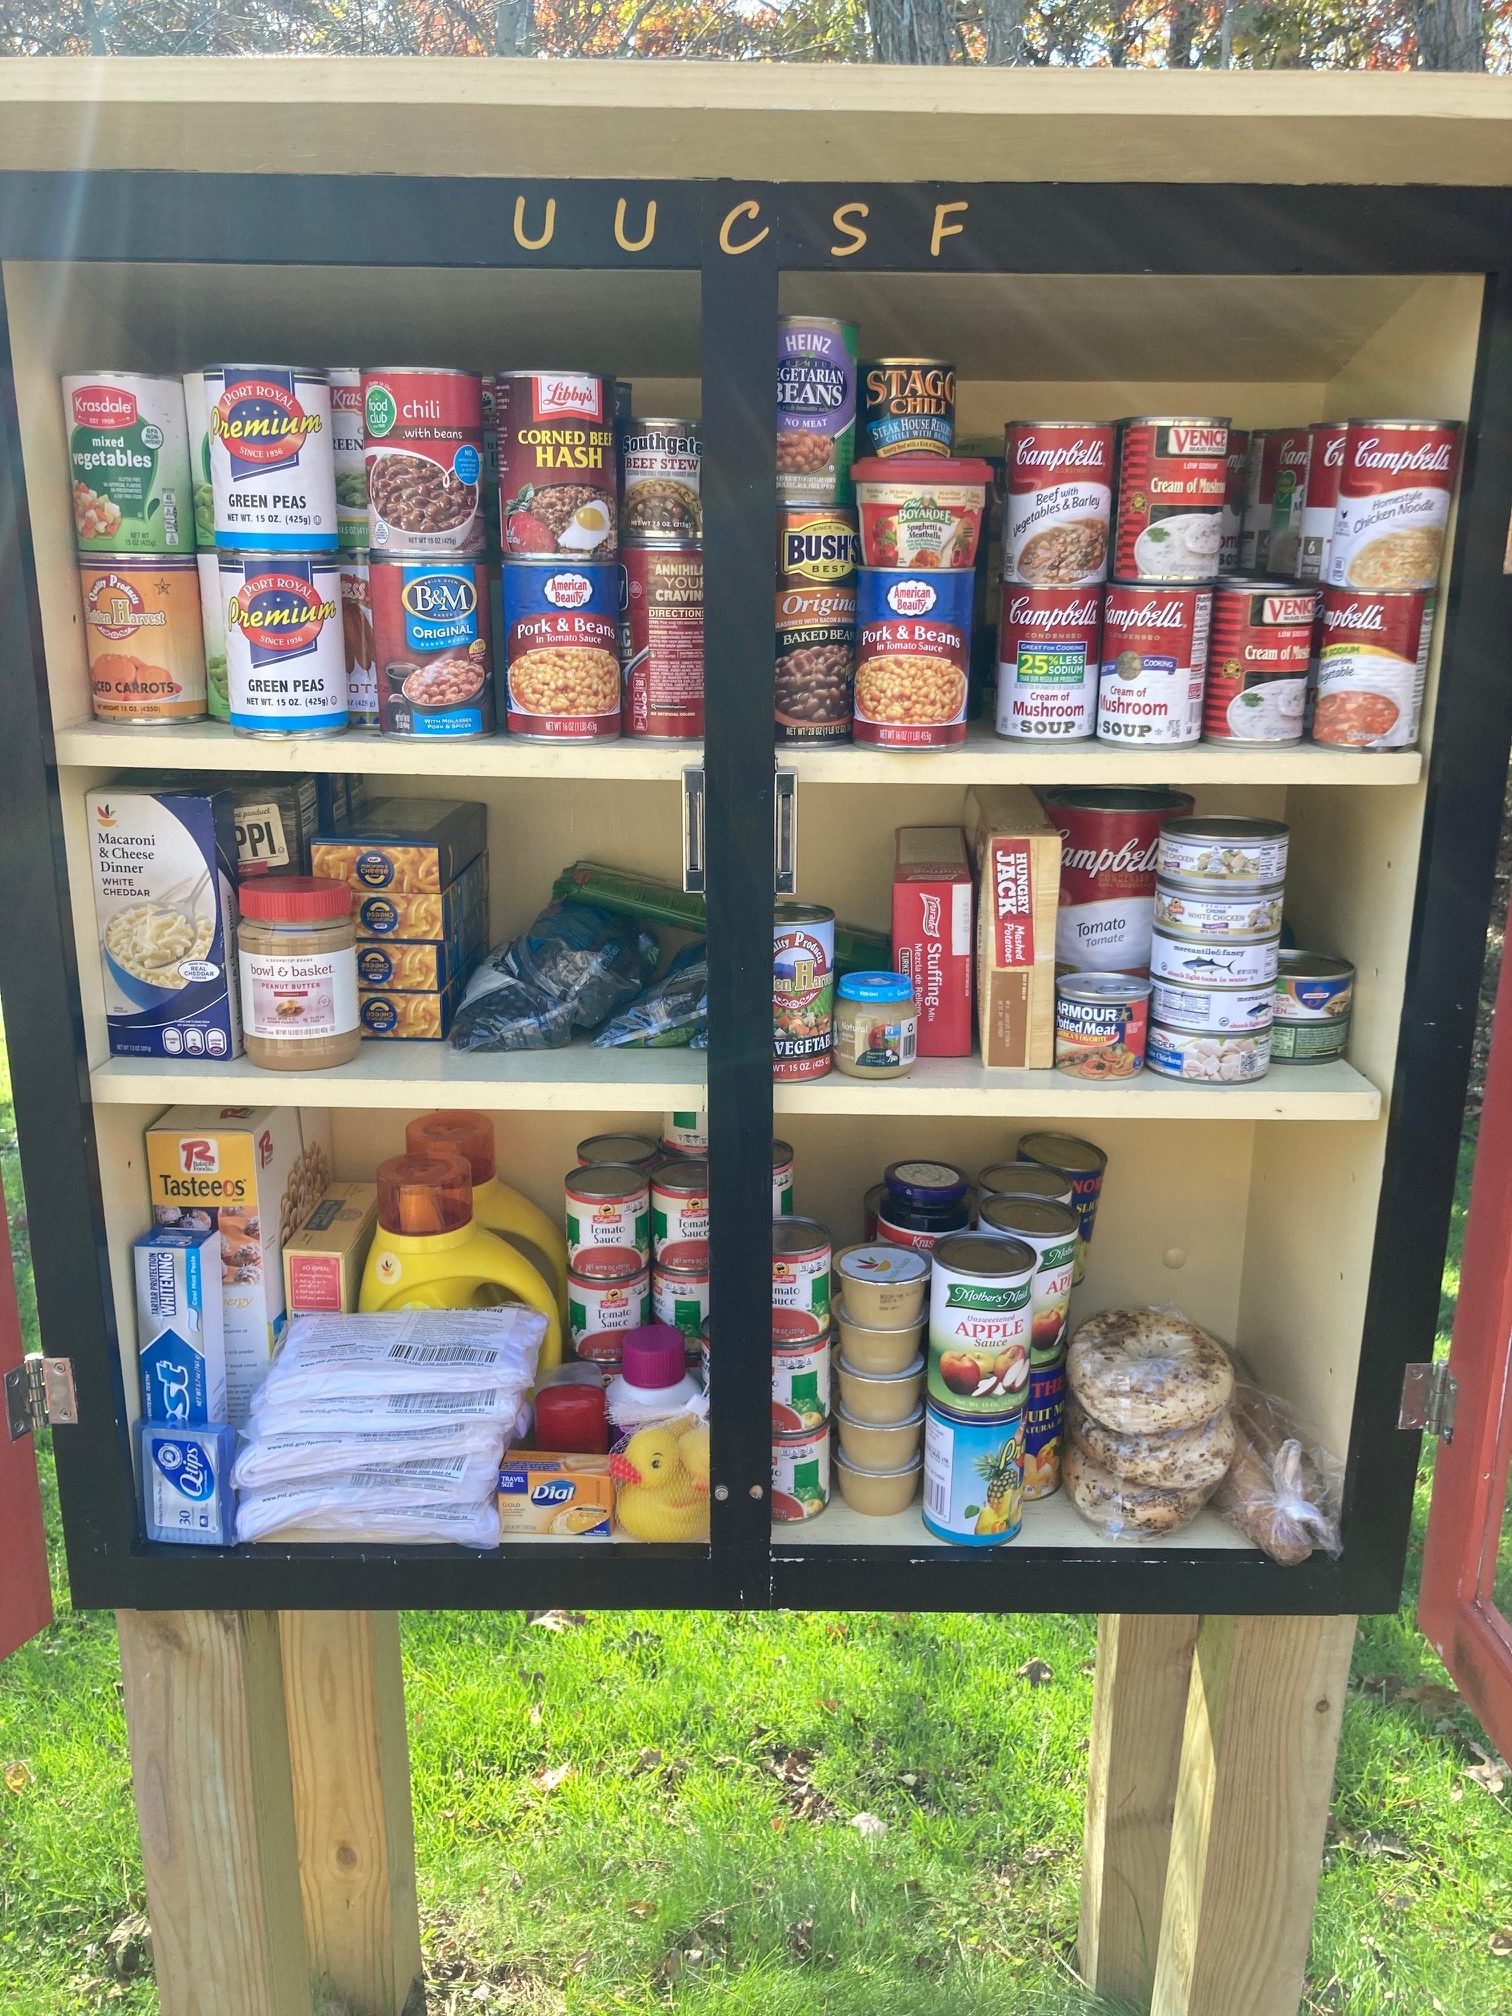 Drop off shelf-stable food, personal hygiene items and tiny toys for children to contribute to the Free Pantry, hosted by the Unitarian Universalist Congregation of the South Fork.